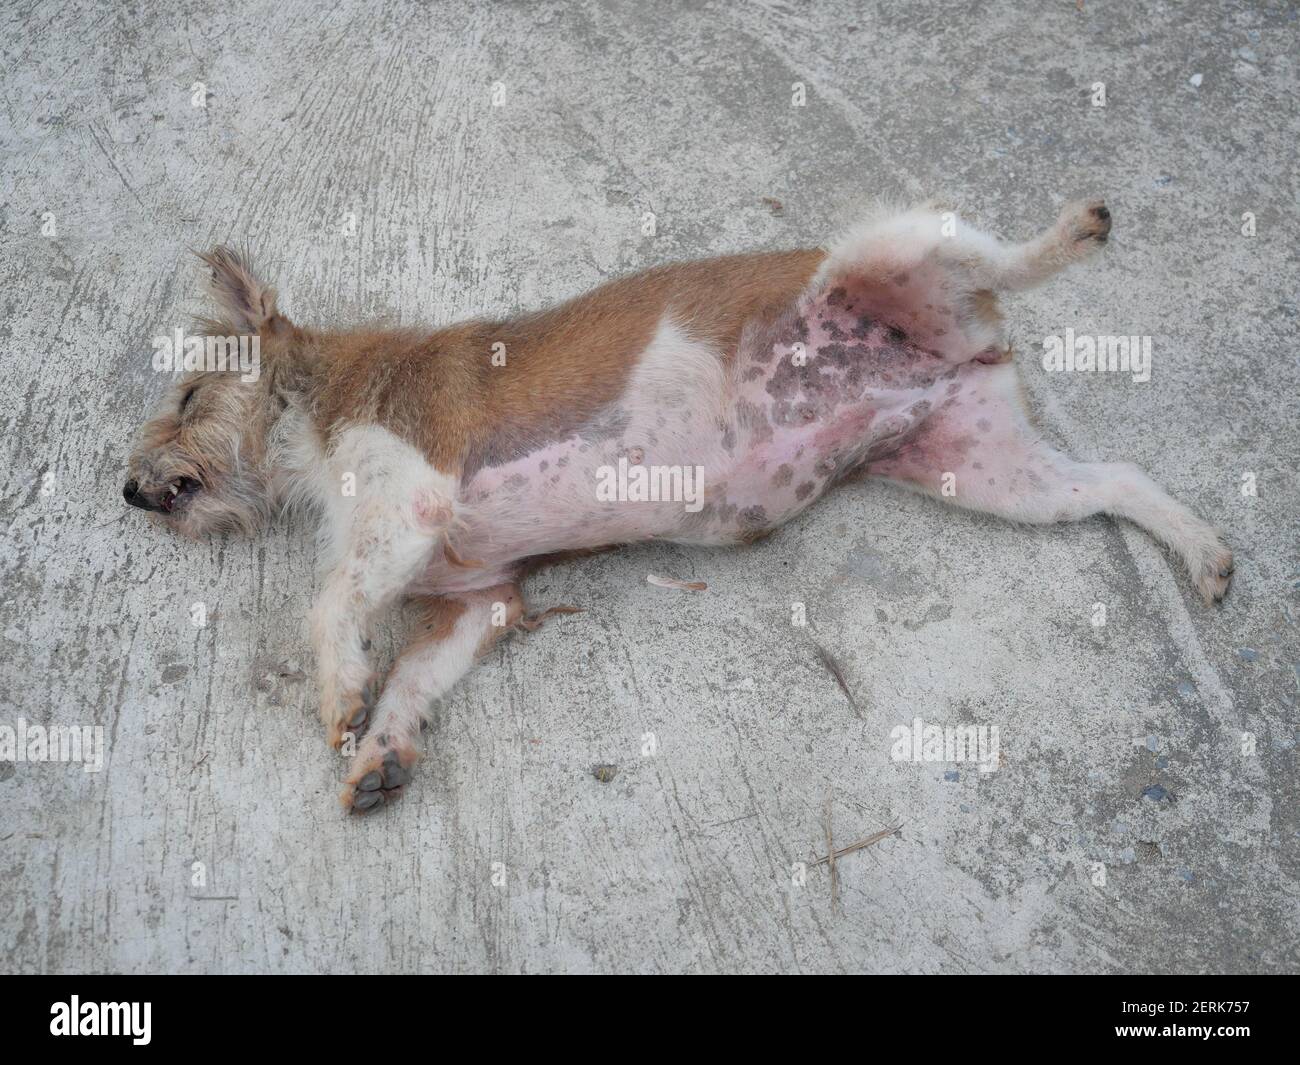 The Brown furry dog lying outstretched leg and revealing belly is full of red rash on gray ground, Funny and cute behavior of pets Stock Photo